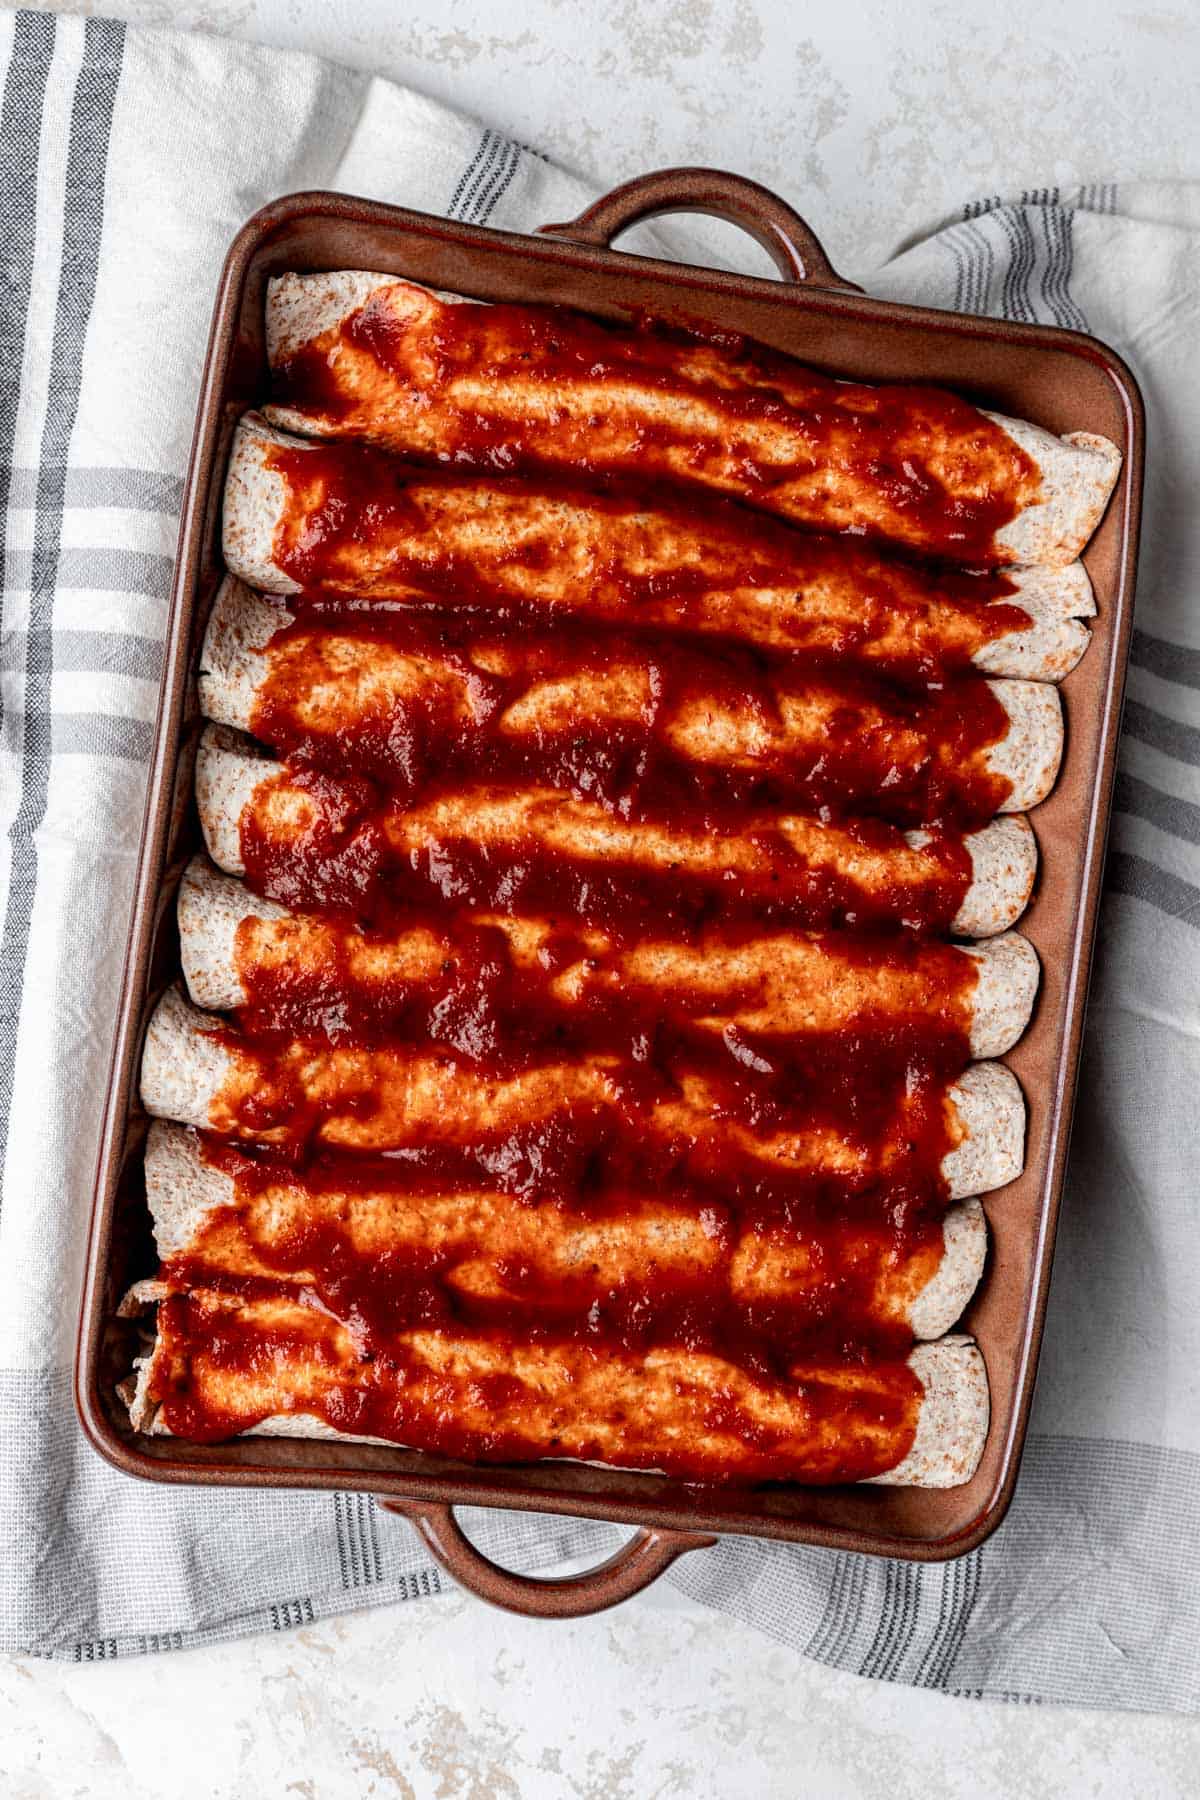 Eight rolled enchiladas topped with enchilada sauce in a baking dish.